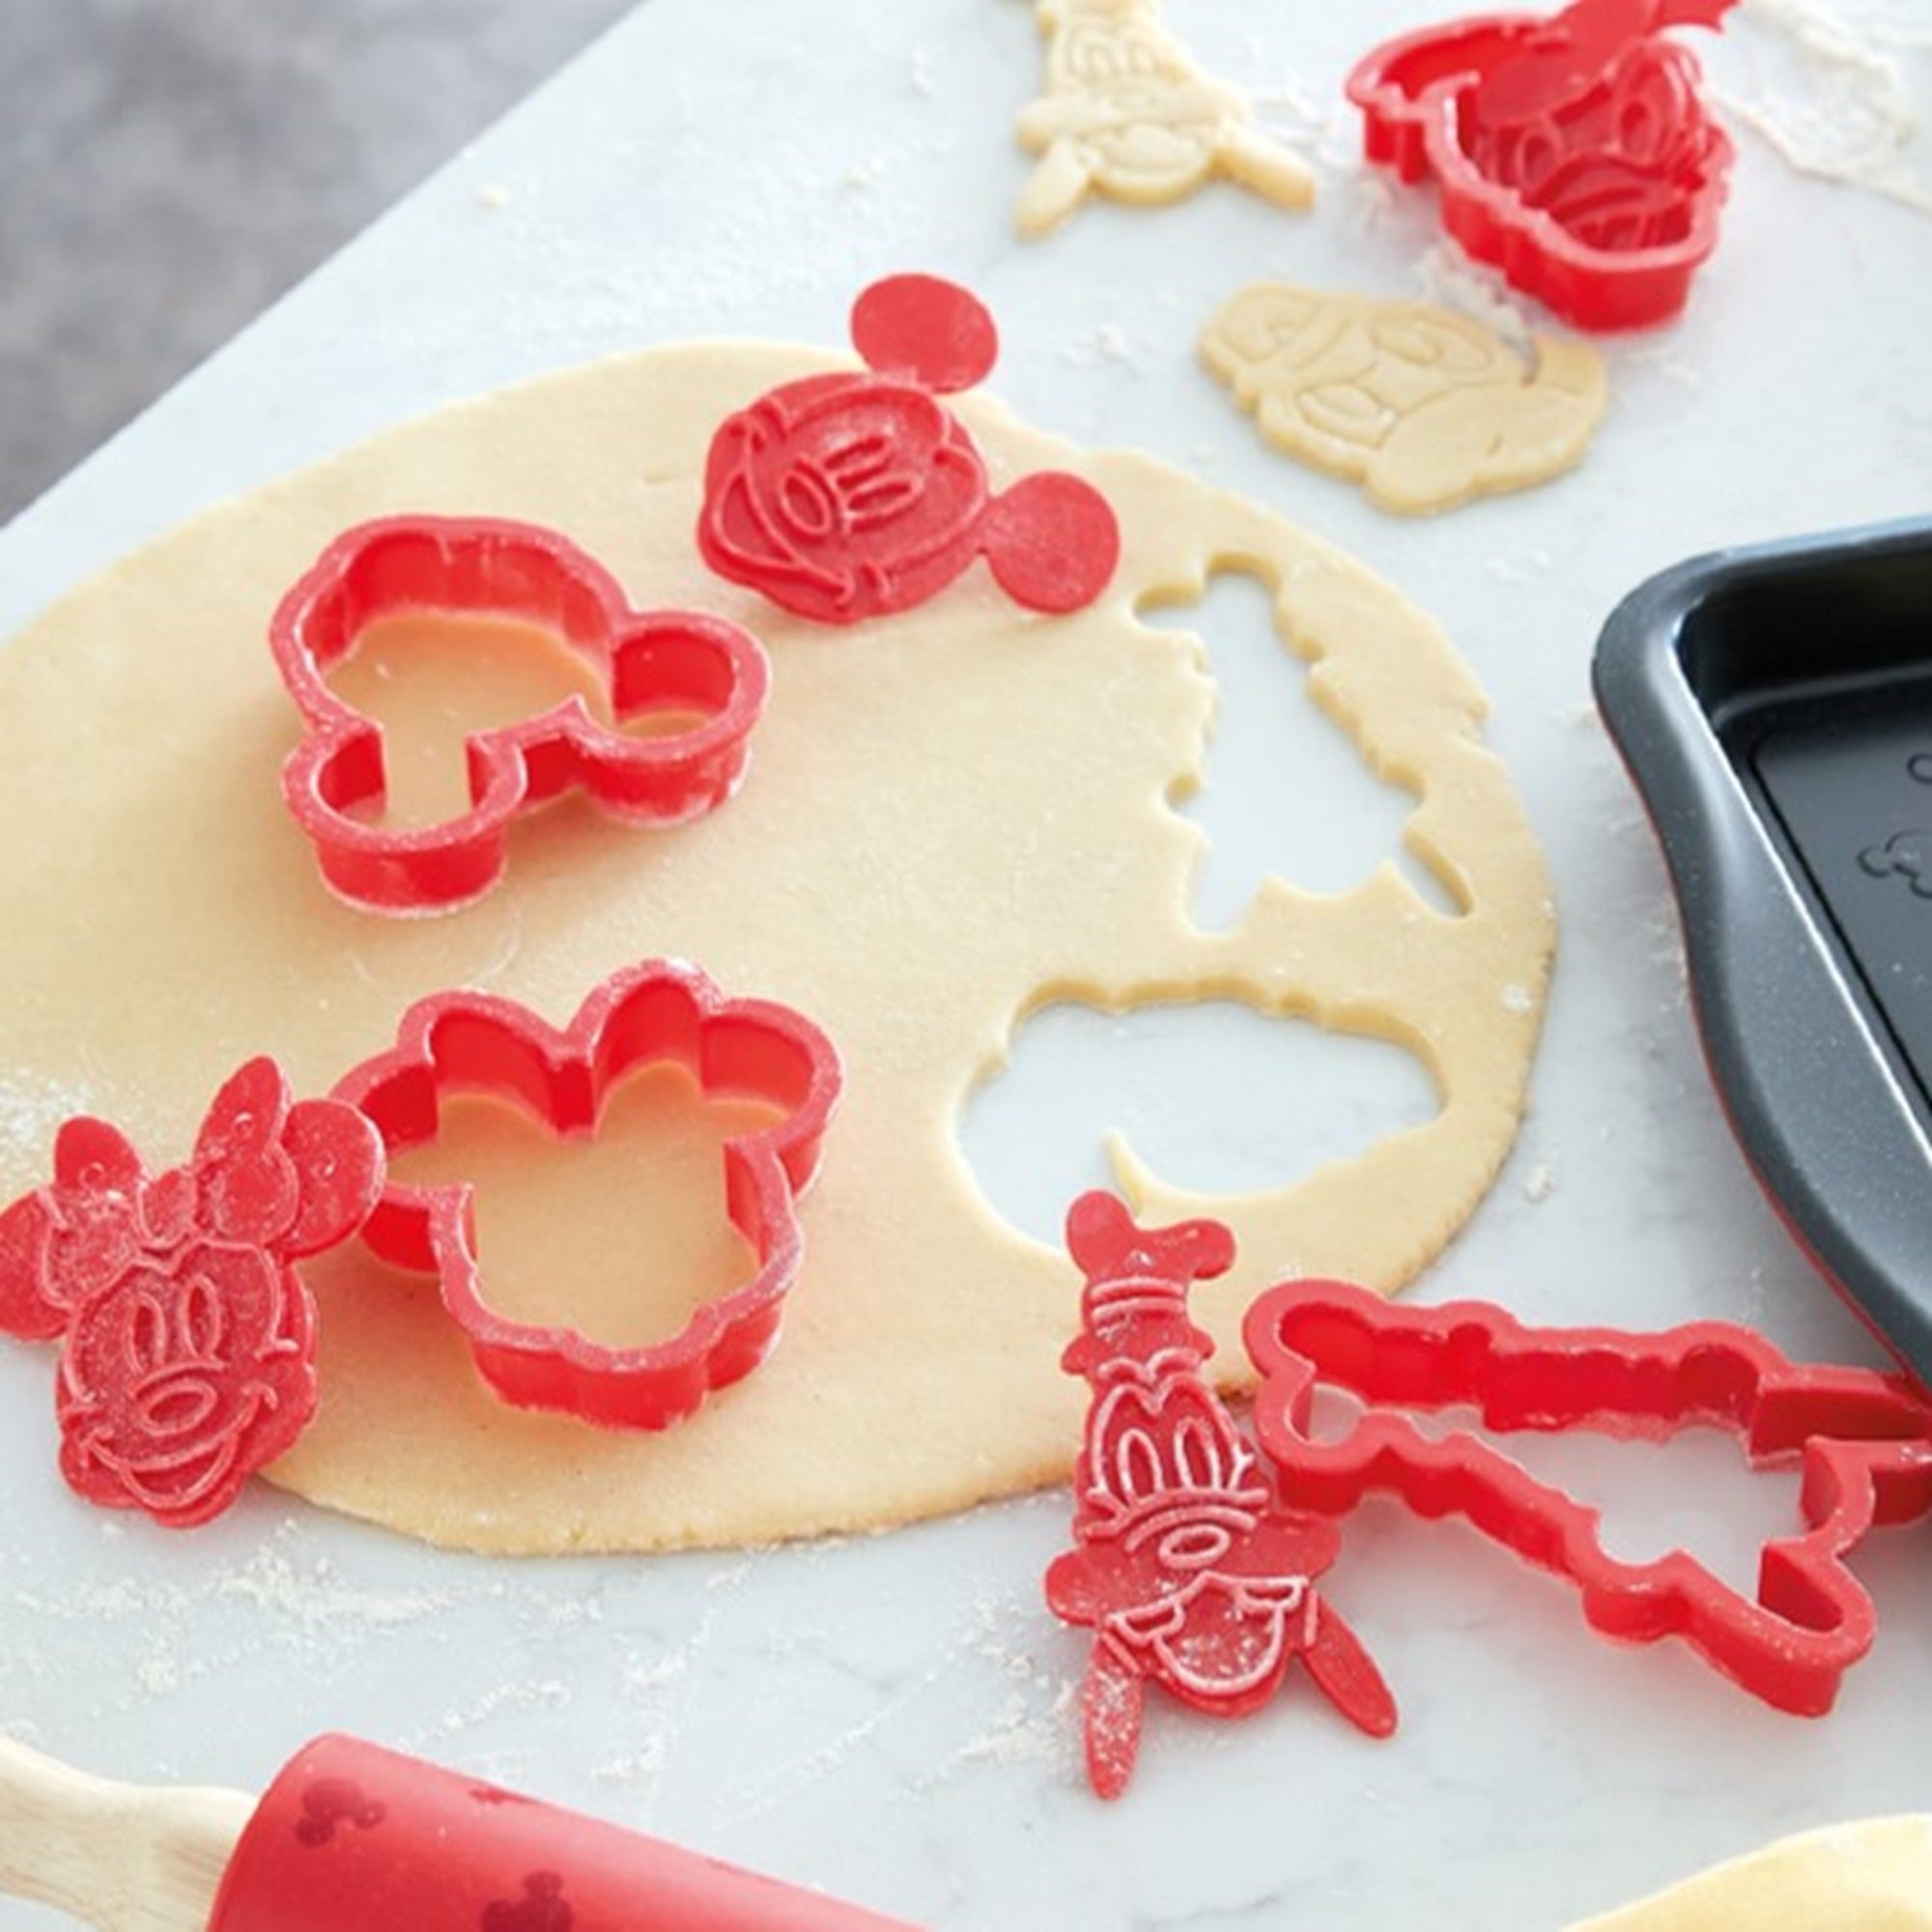 Prestige Disney Bake with Mickey Cookie Cutters Set, 4pce